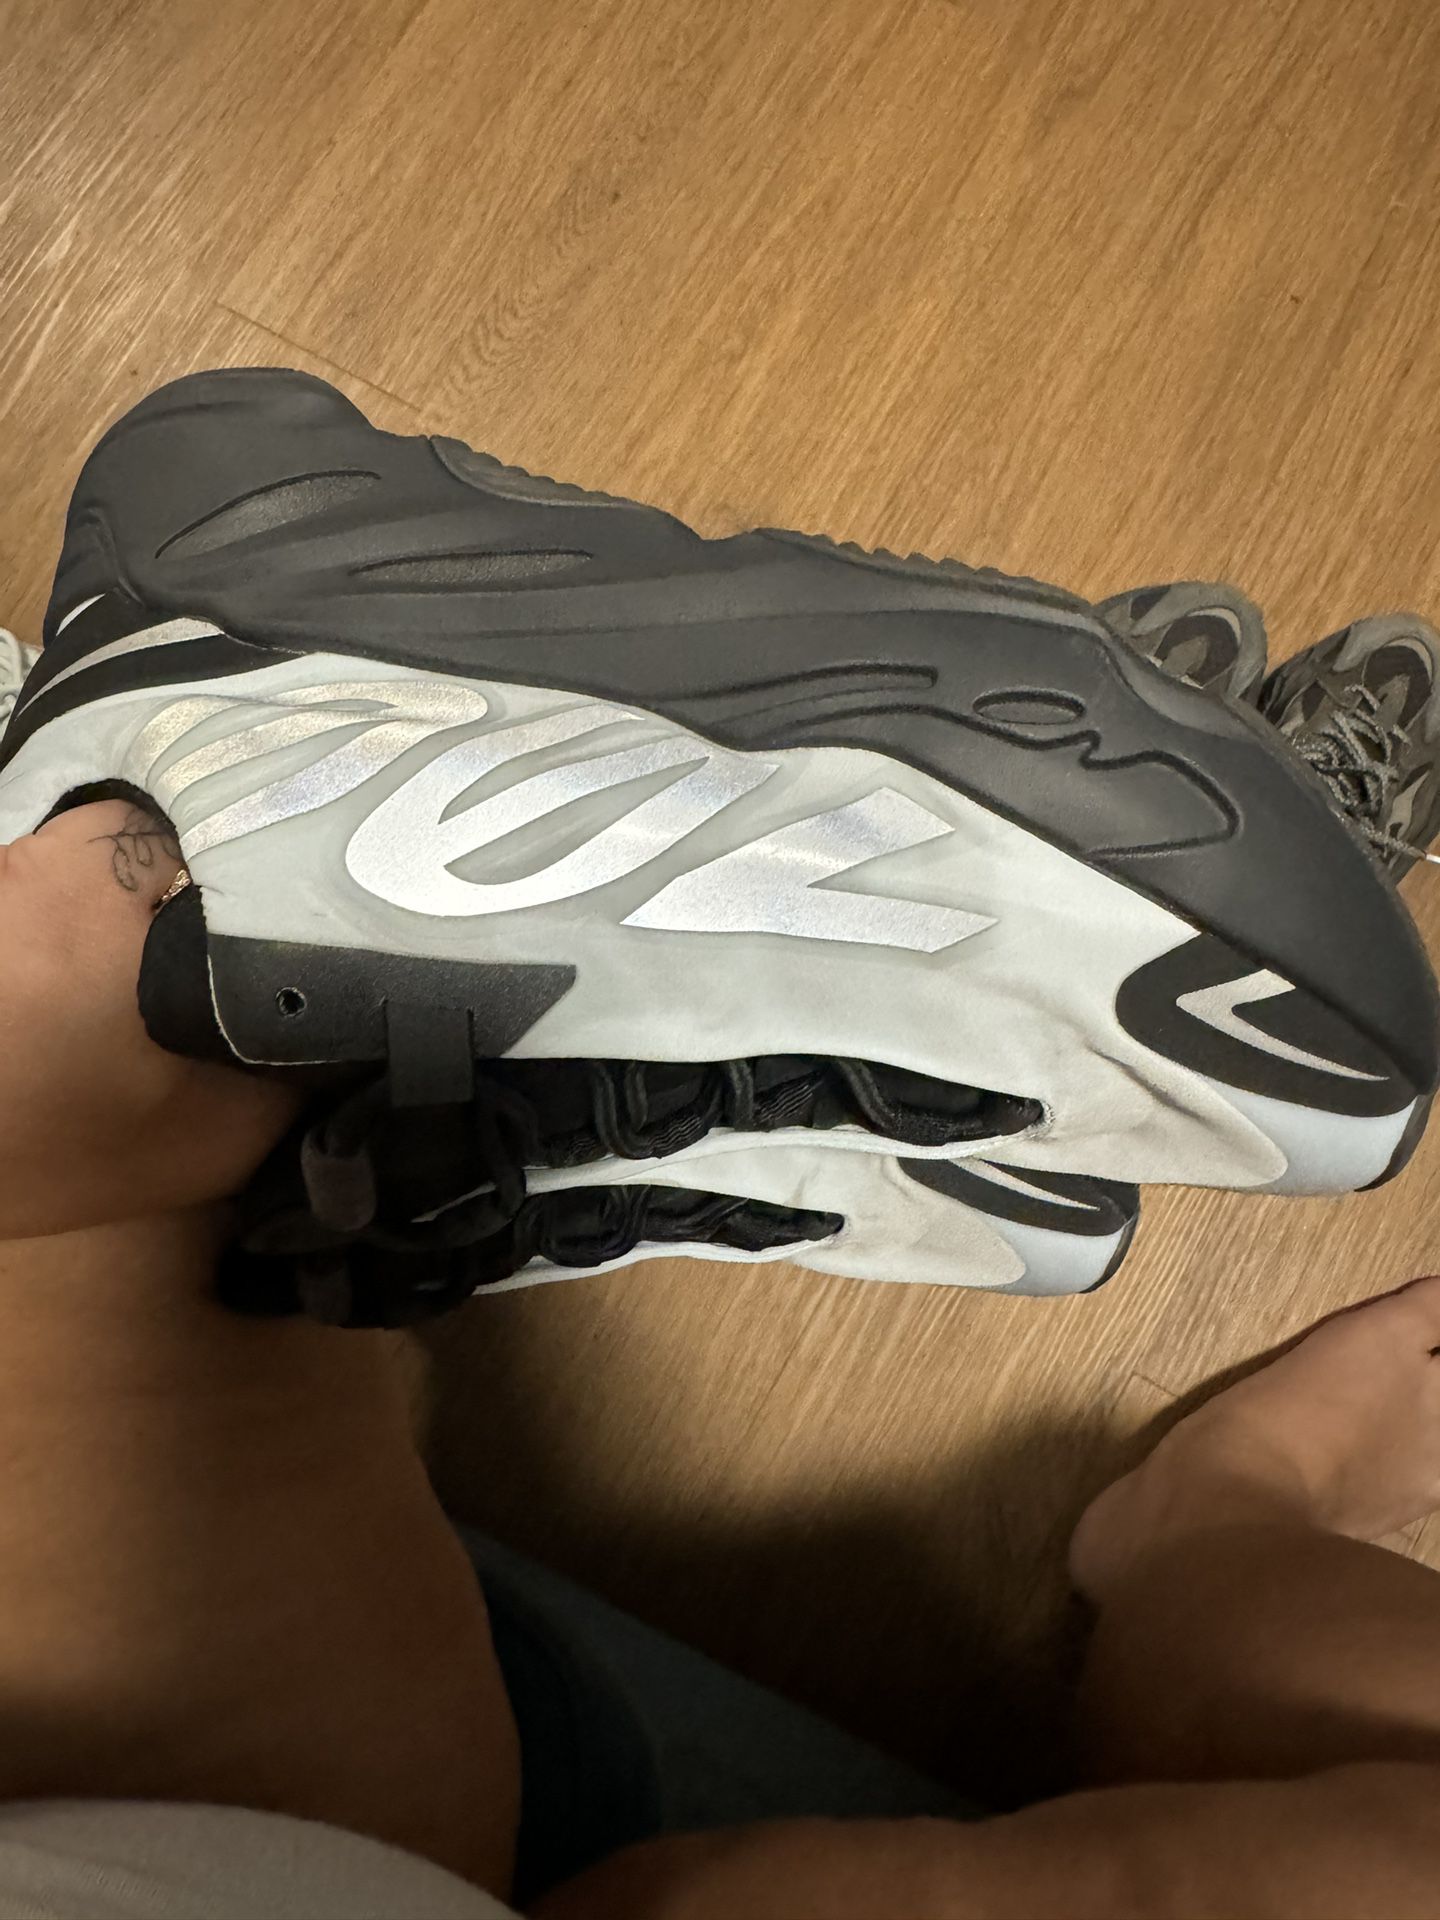 Yeezy Boost 700 MNVN Blue Tint - 6M for Sale in Seattle, WA - OfferUp